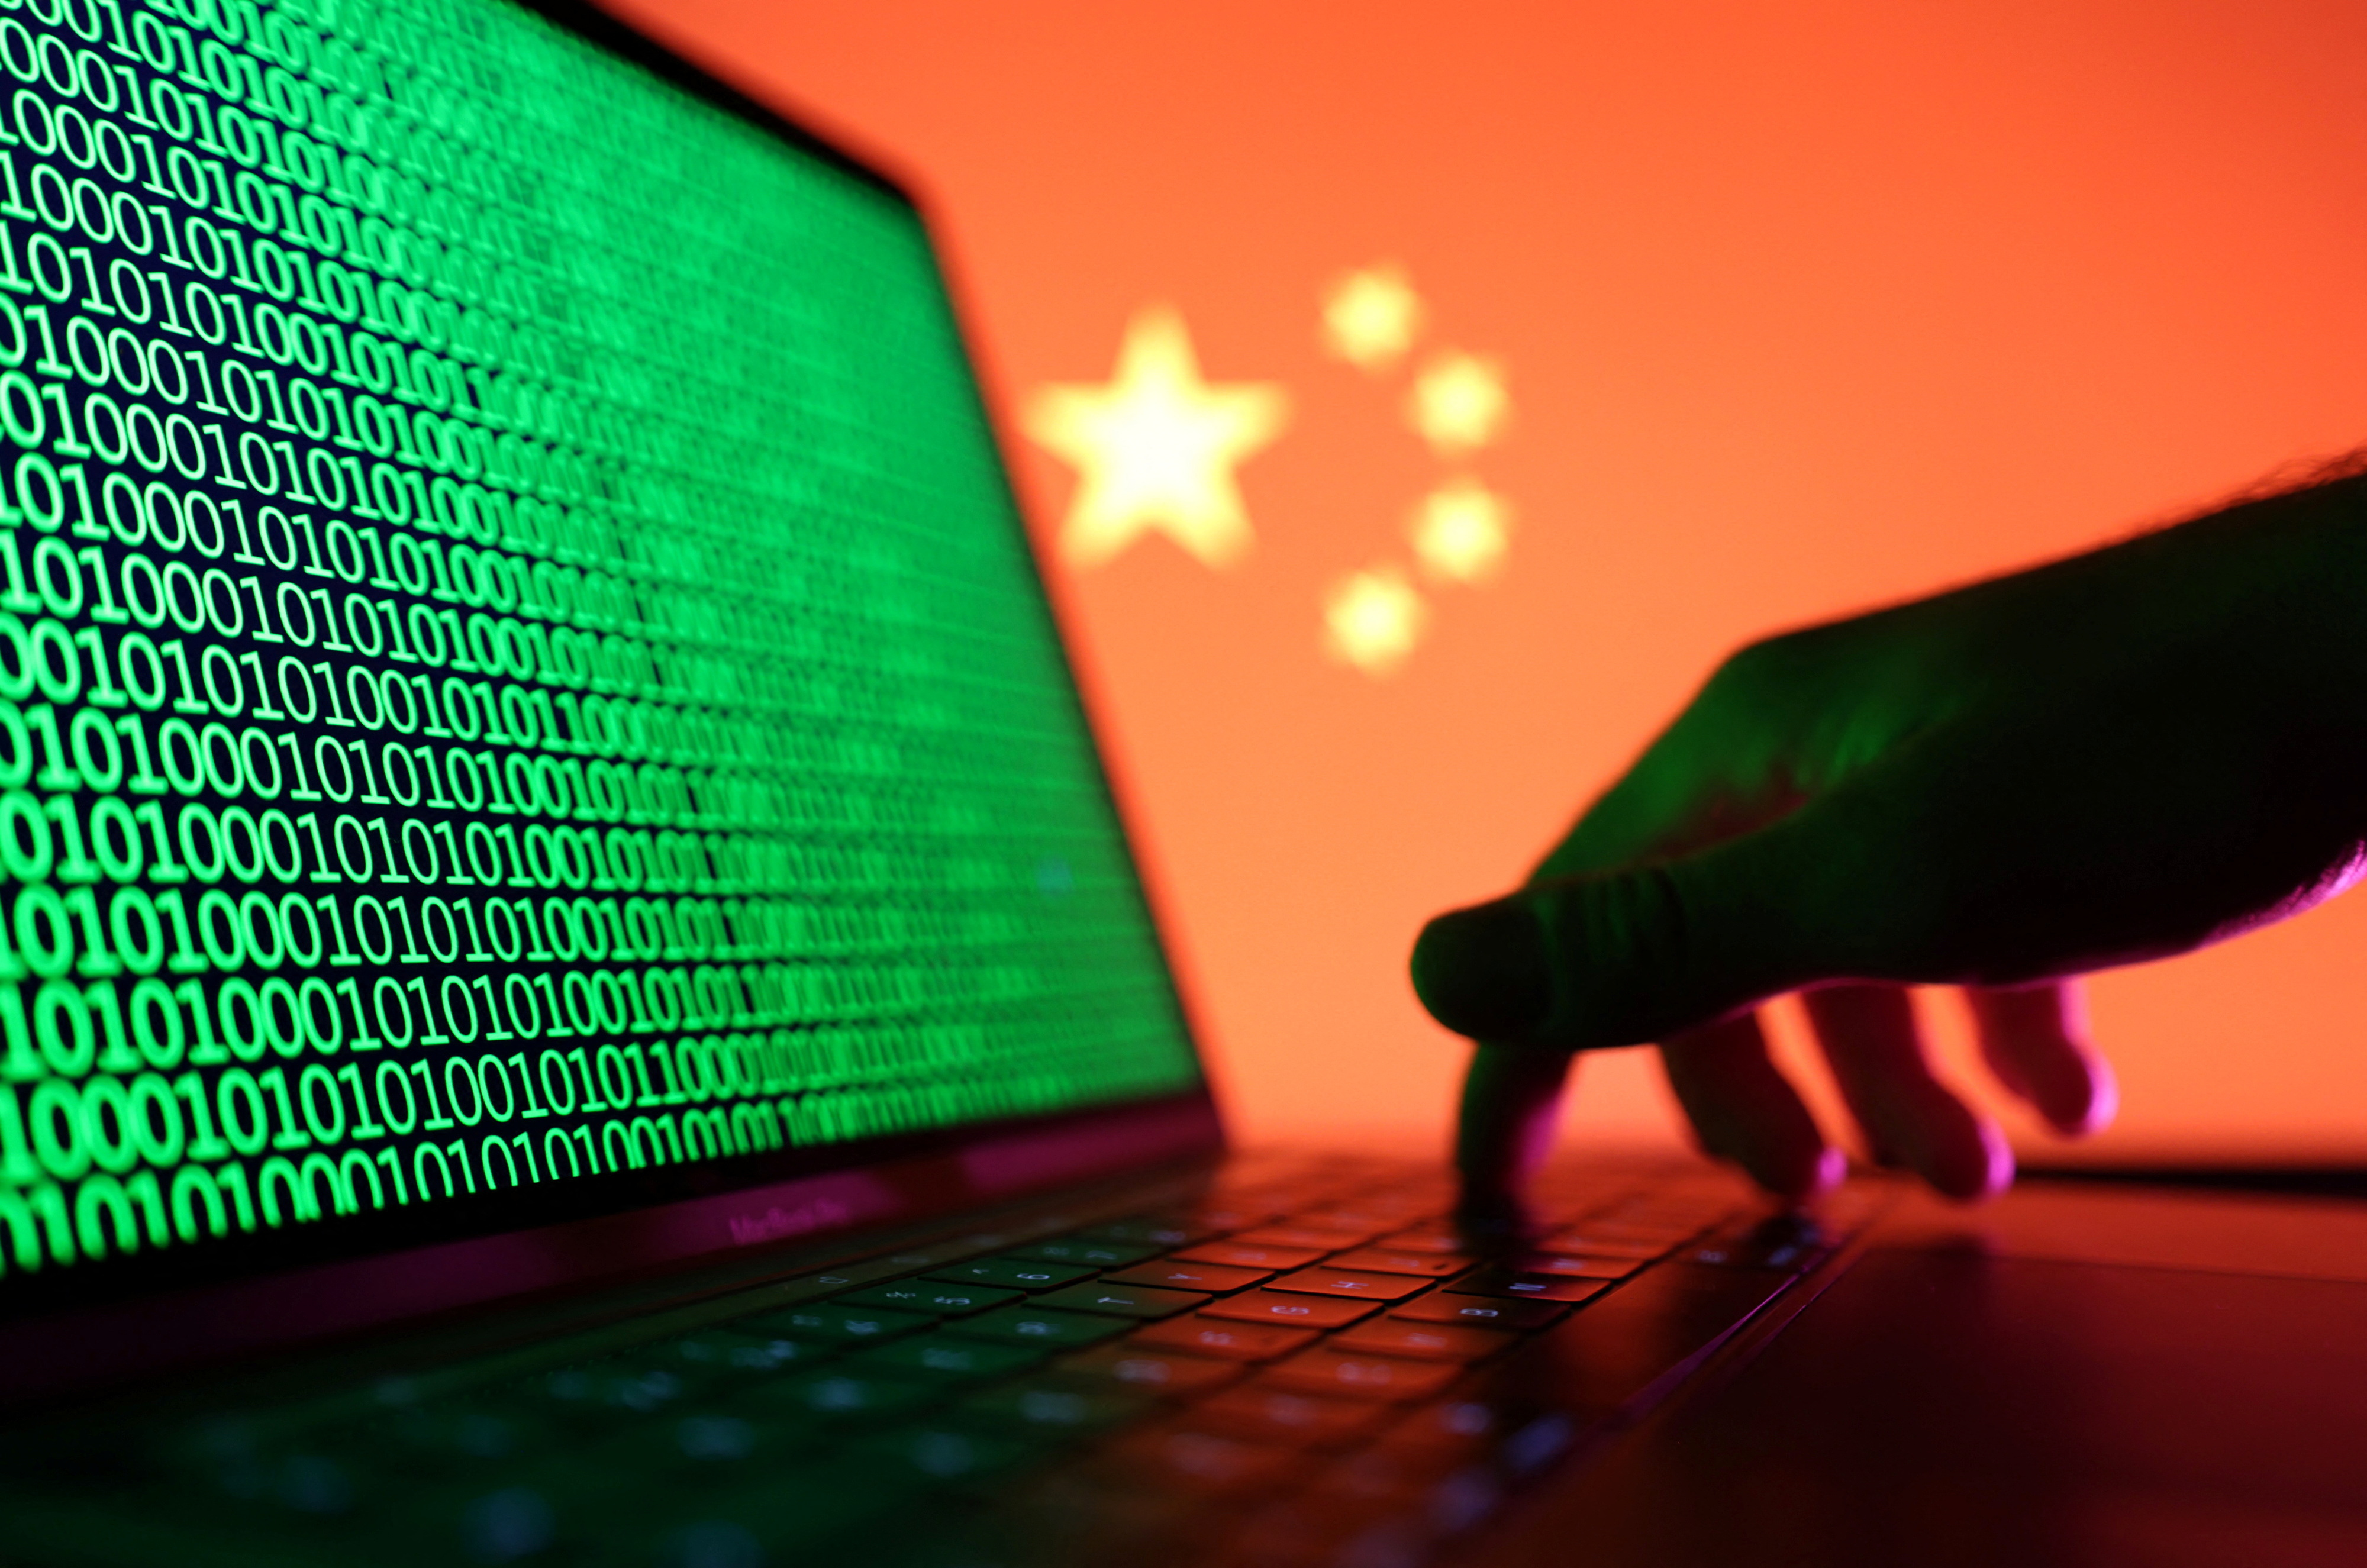 Illustration shows a laptop with binary codes displayed in front of the Chinese flag